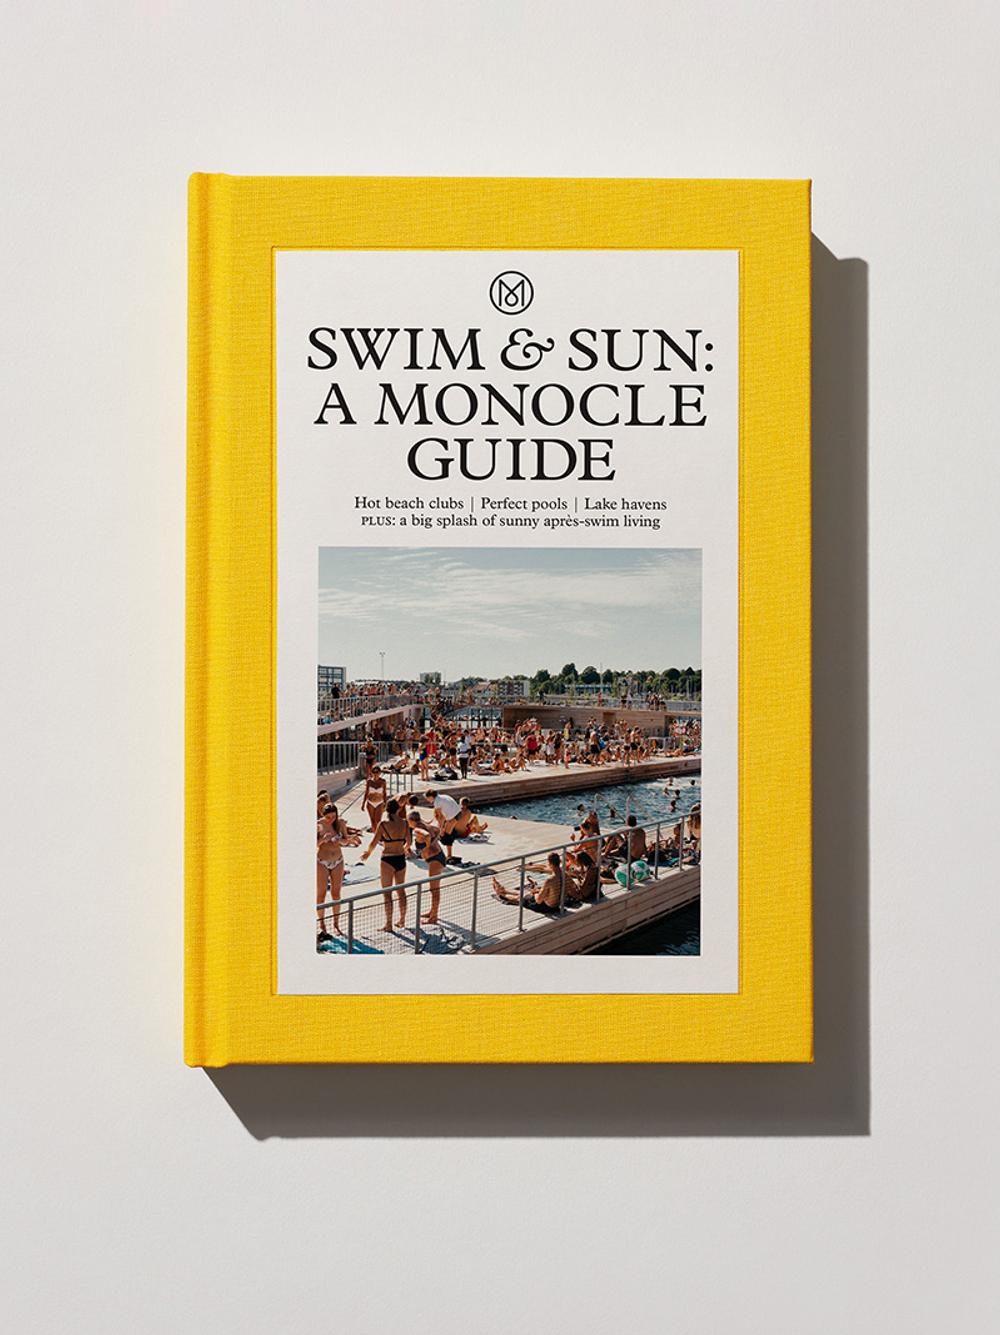 Swim and Sun:  A Monocle Guide To Hot Beach Clubs, Perfect Pools, Lake Havens